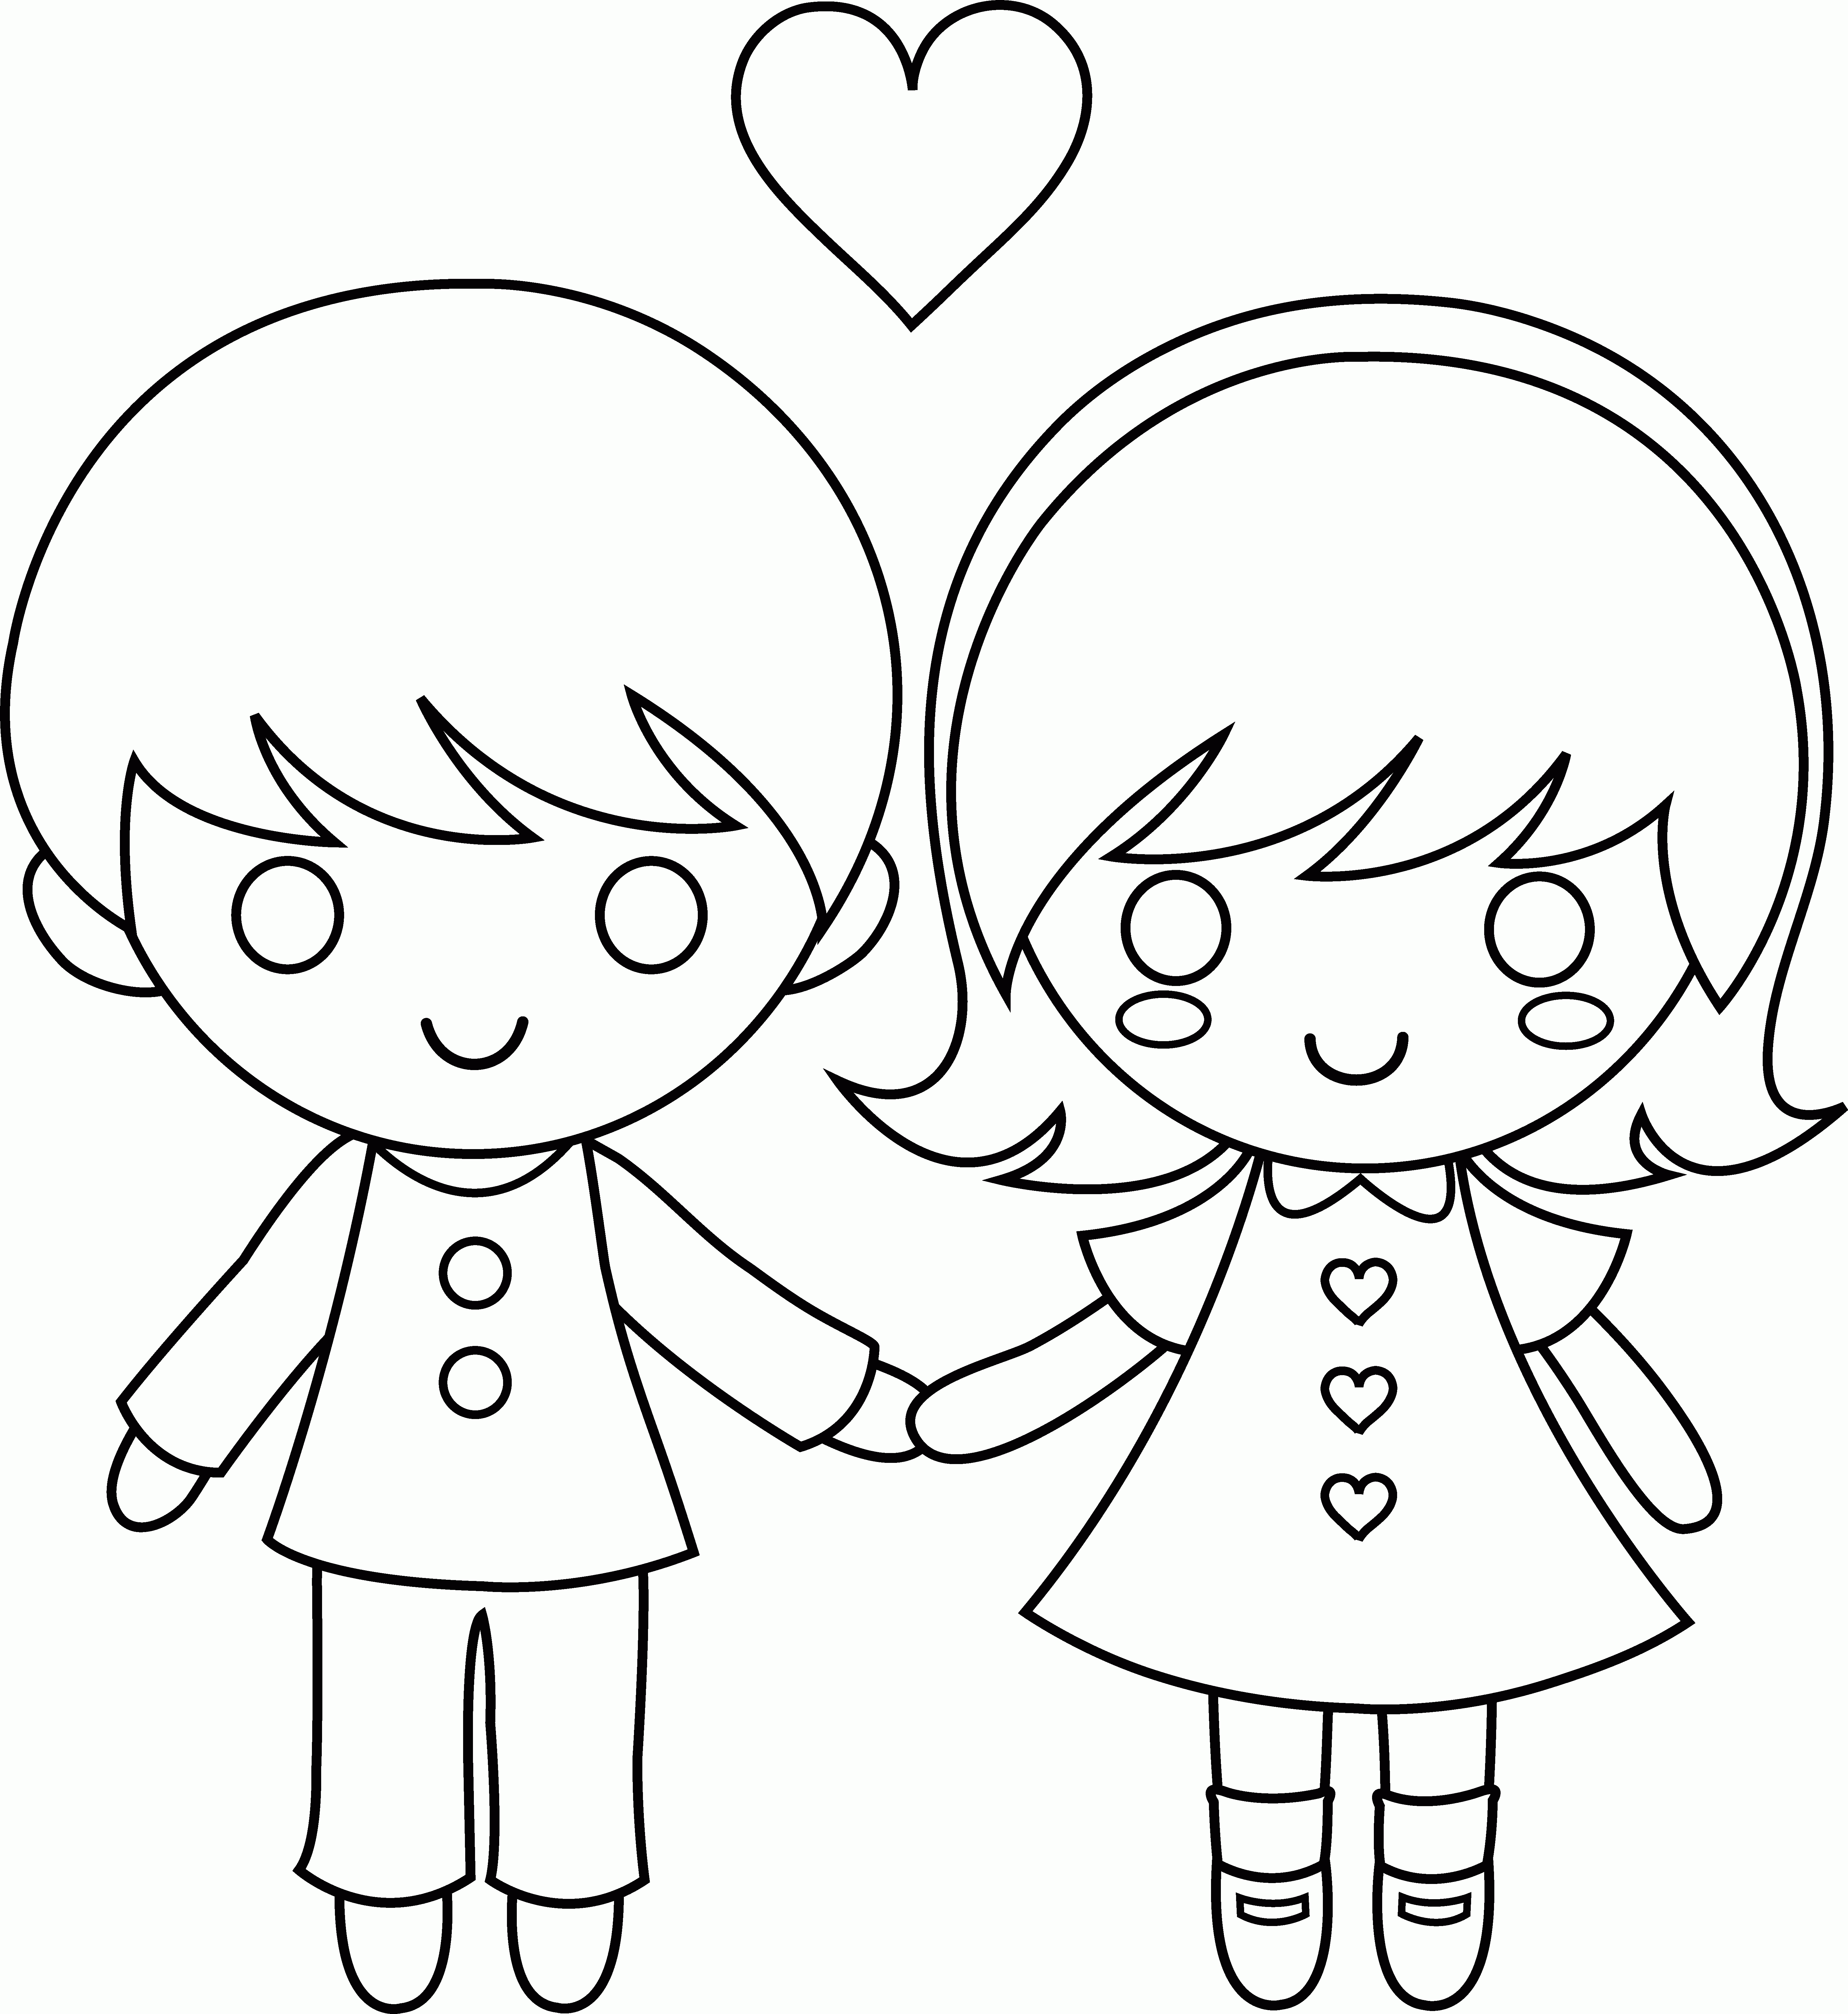 Coloring Pages: Boy And Girl Coloring Pages, Enchanting Coloring ...